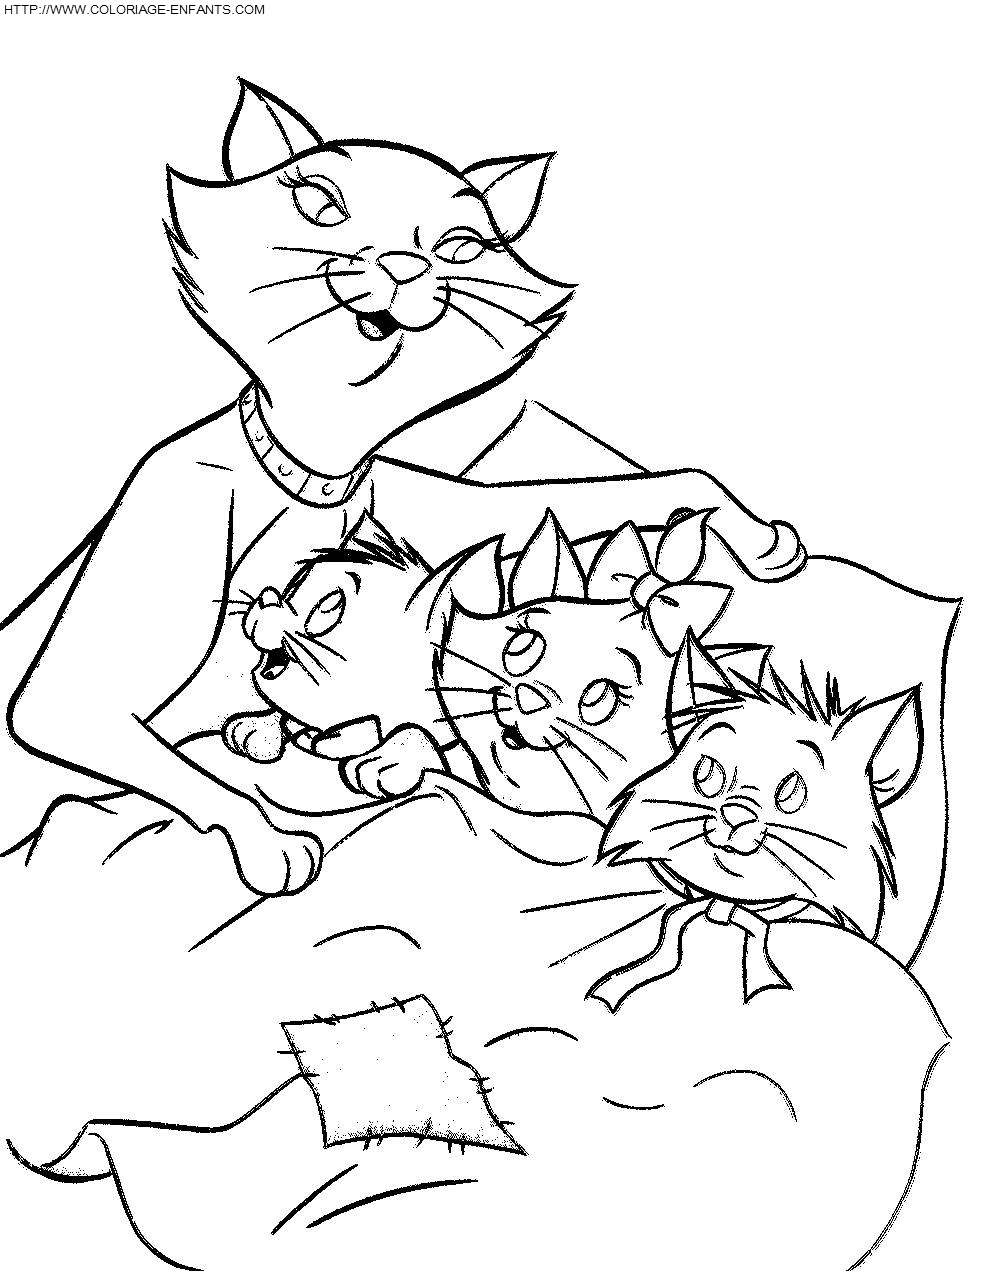 imagesdessine tiny galerie les petits chats source 8i3 coloriage coloriage dessin animaux chats 004